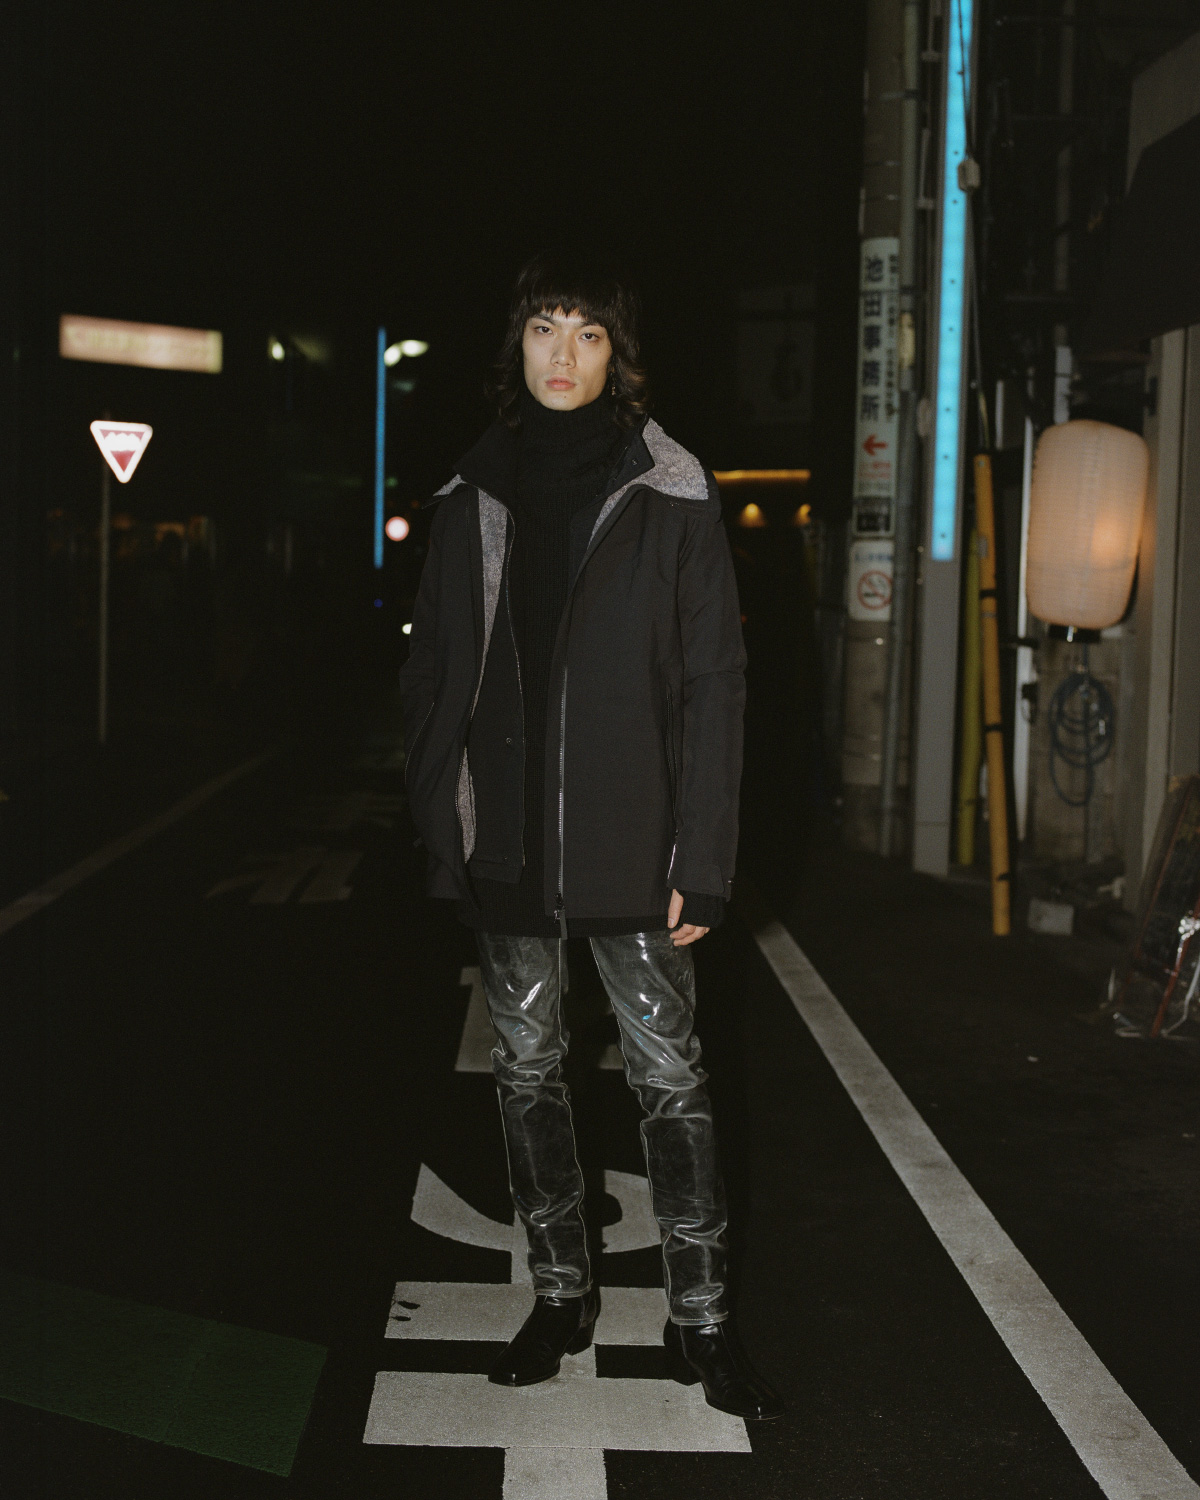 Wolfskin Tech Lab Travels to Tokyo for FW19 Collection